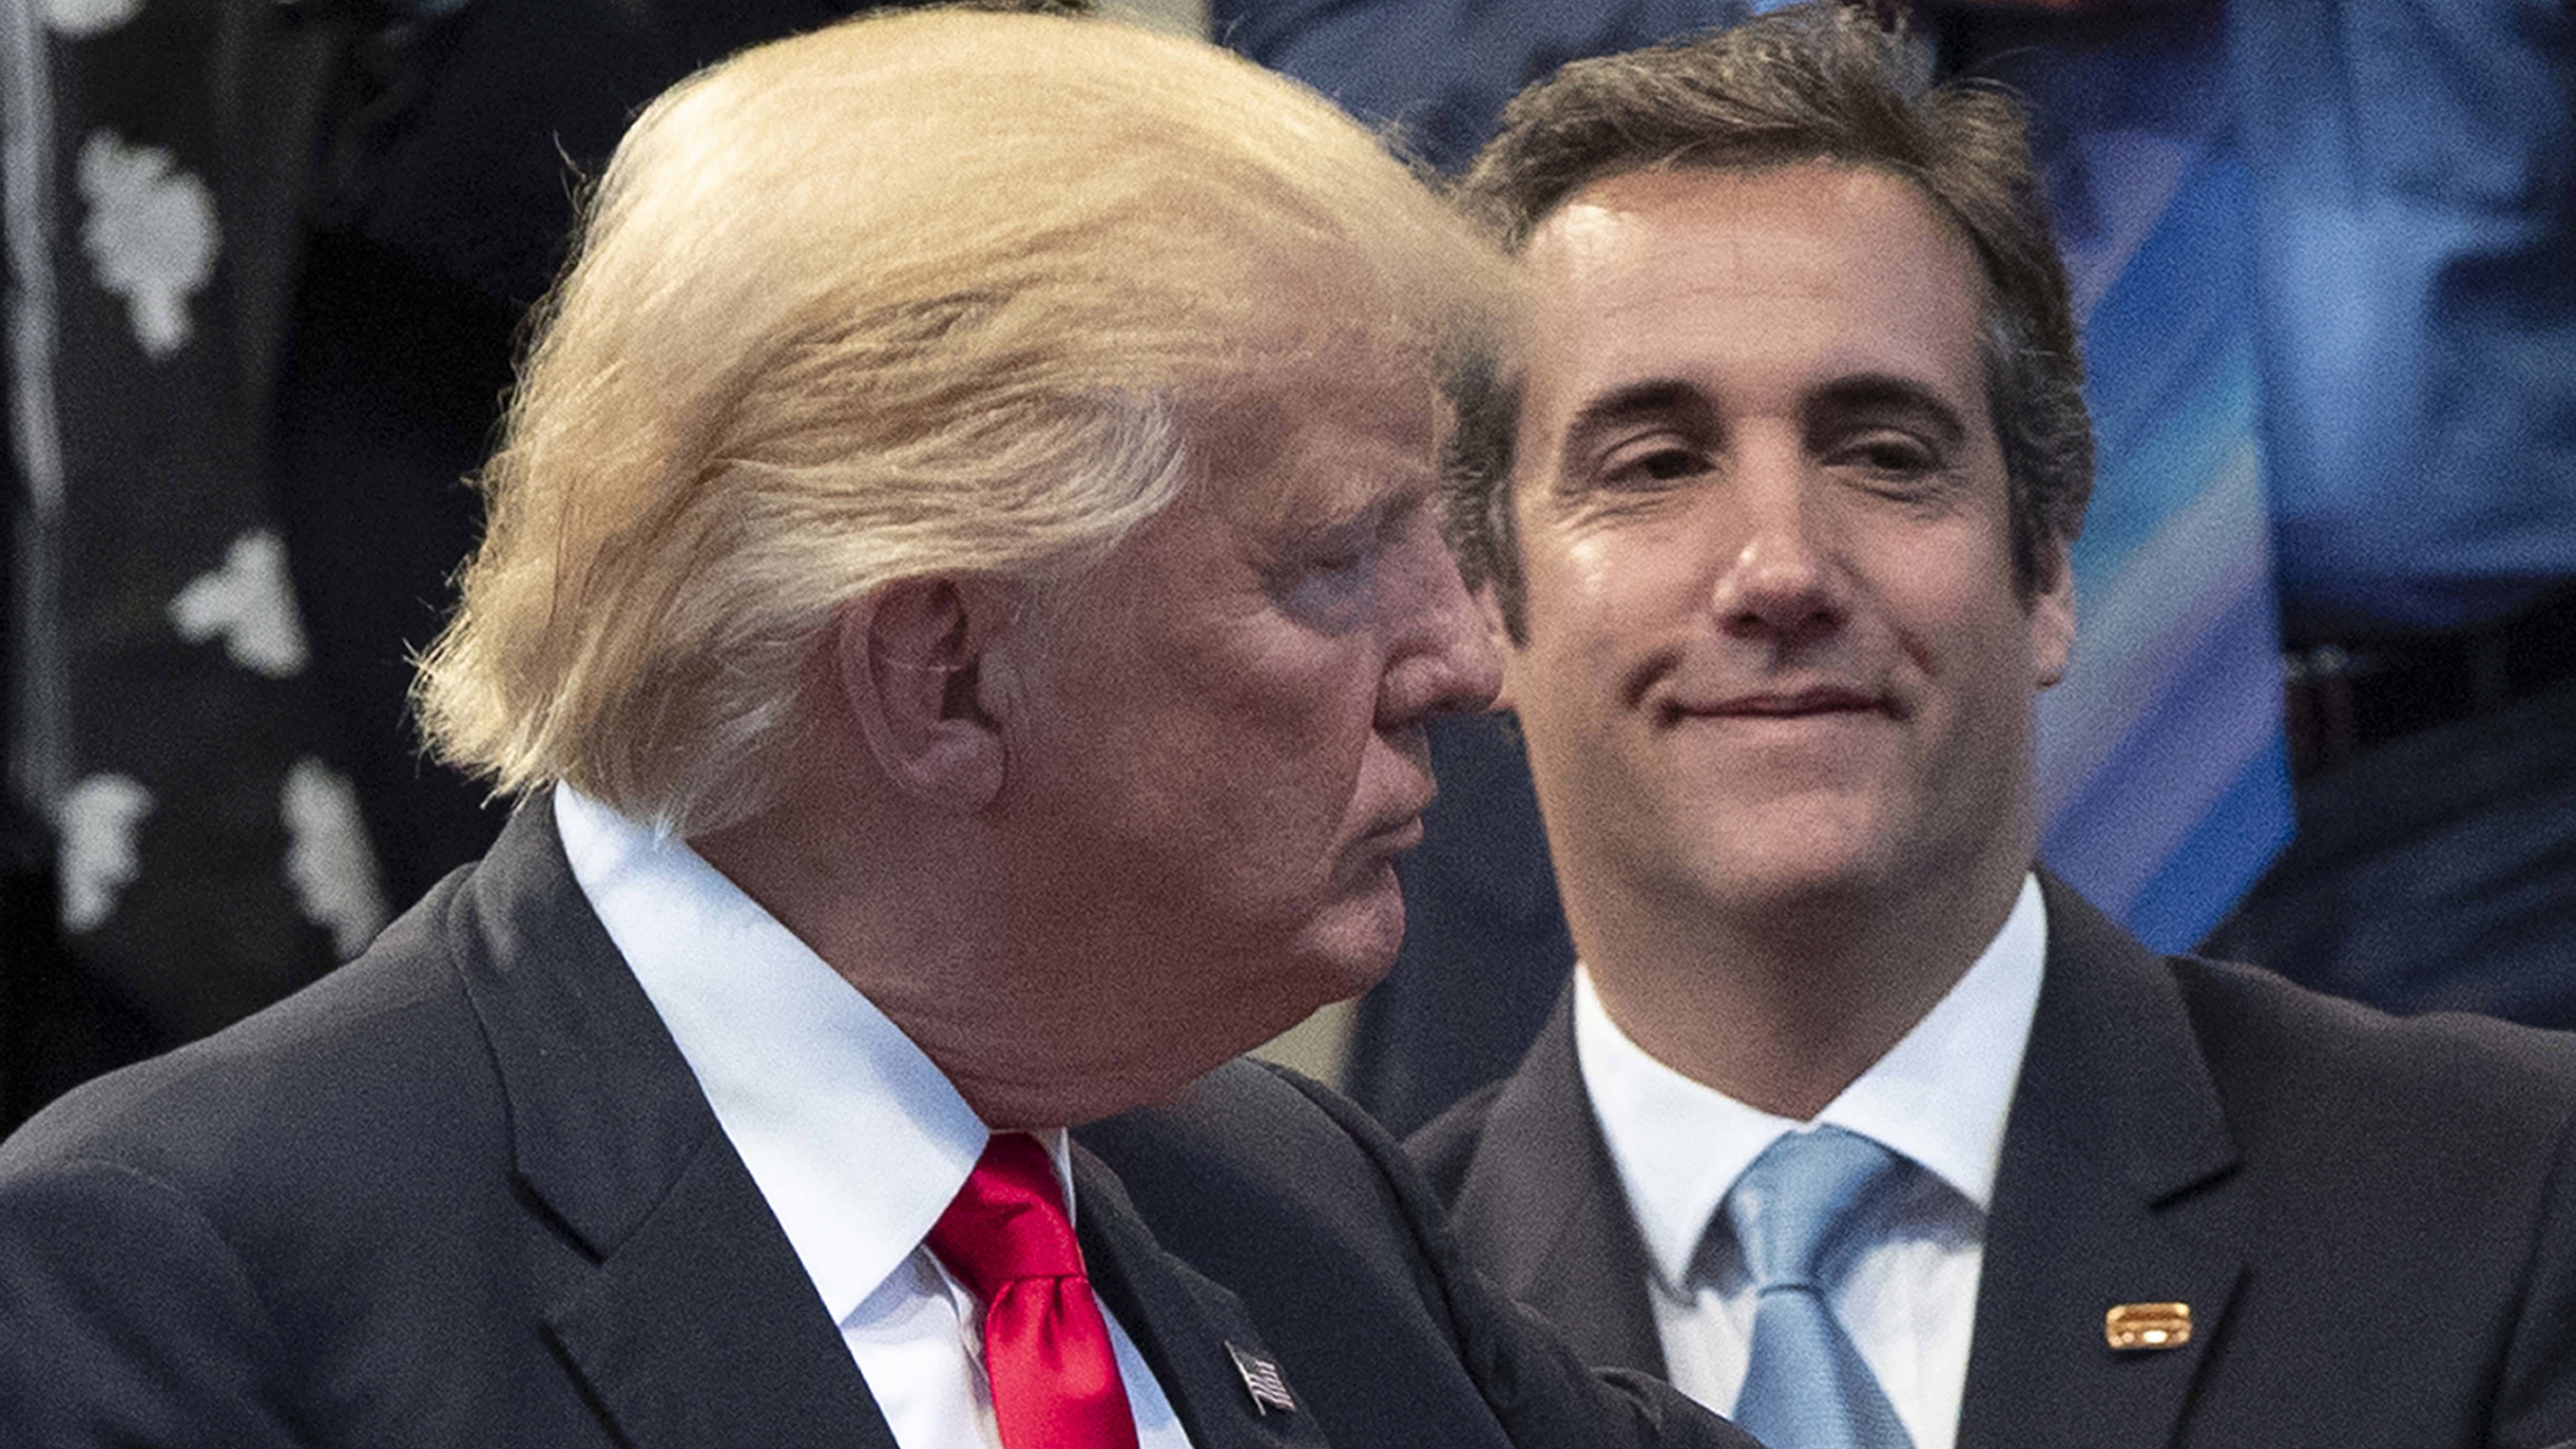 Defence in Trump’s hush money trial brings up Cohen’s AI chaos